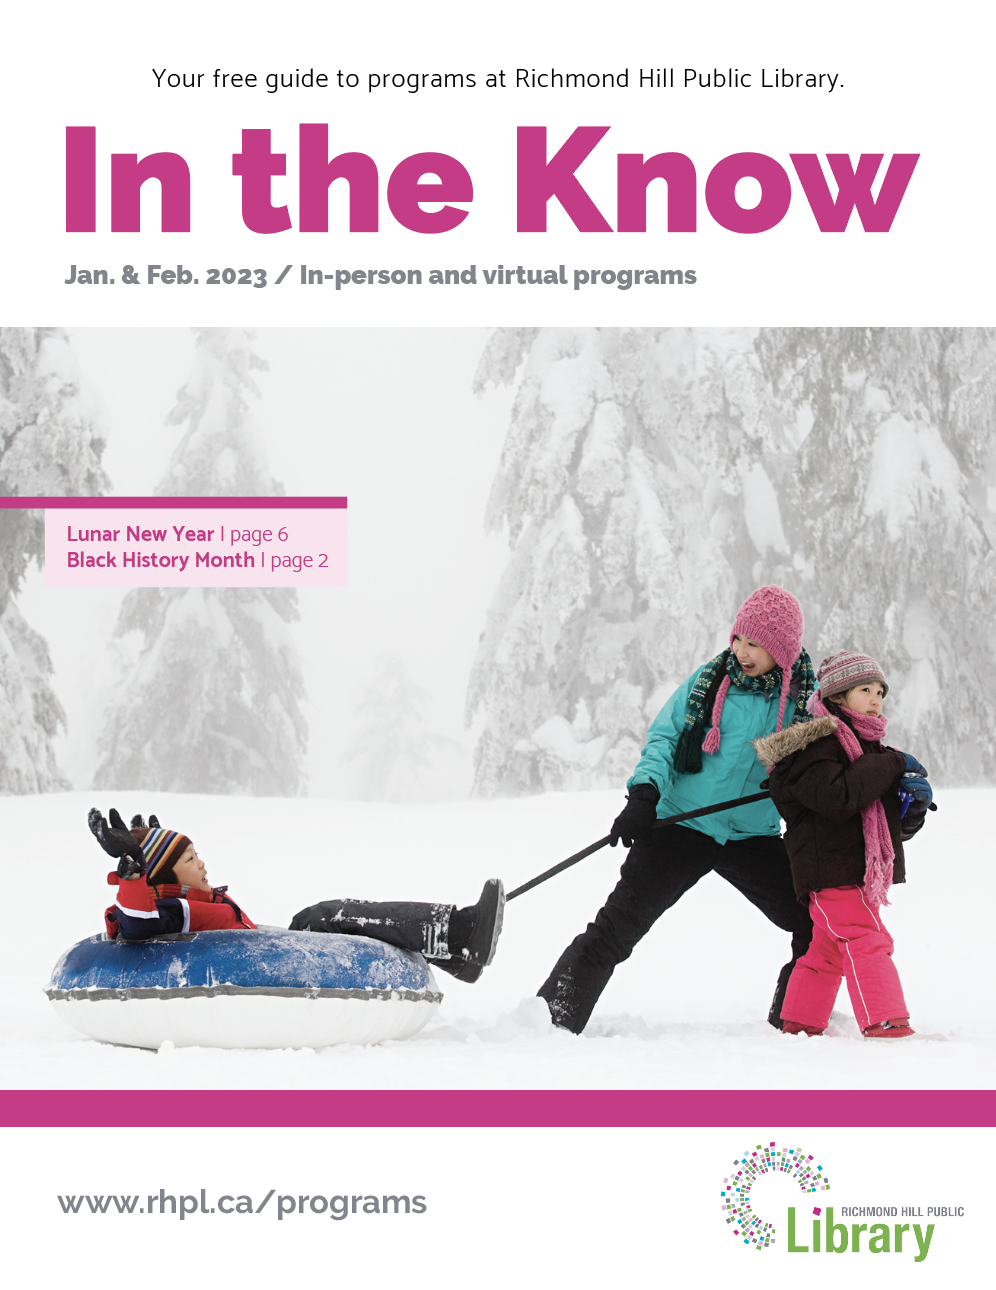 A cover of the program guide. With three kids in jackets and snowpants playing with a sled outside with snow.